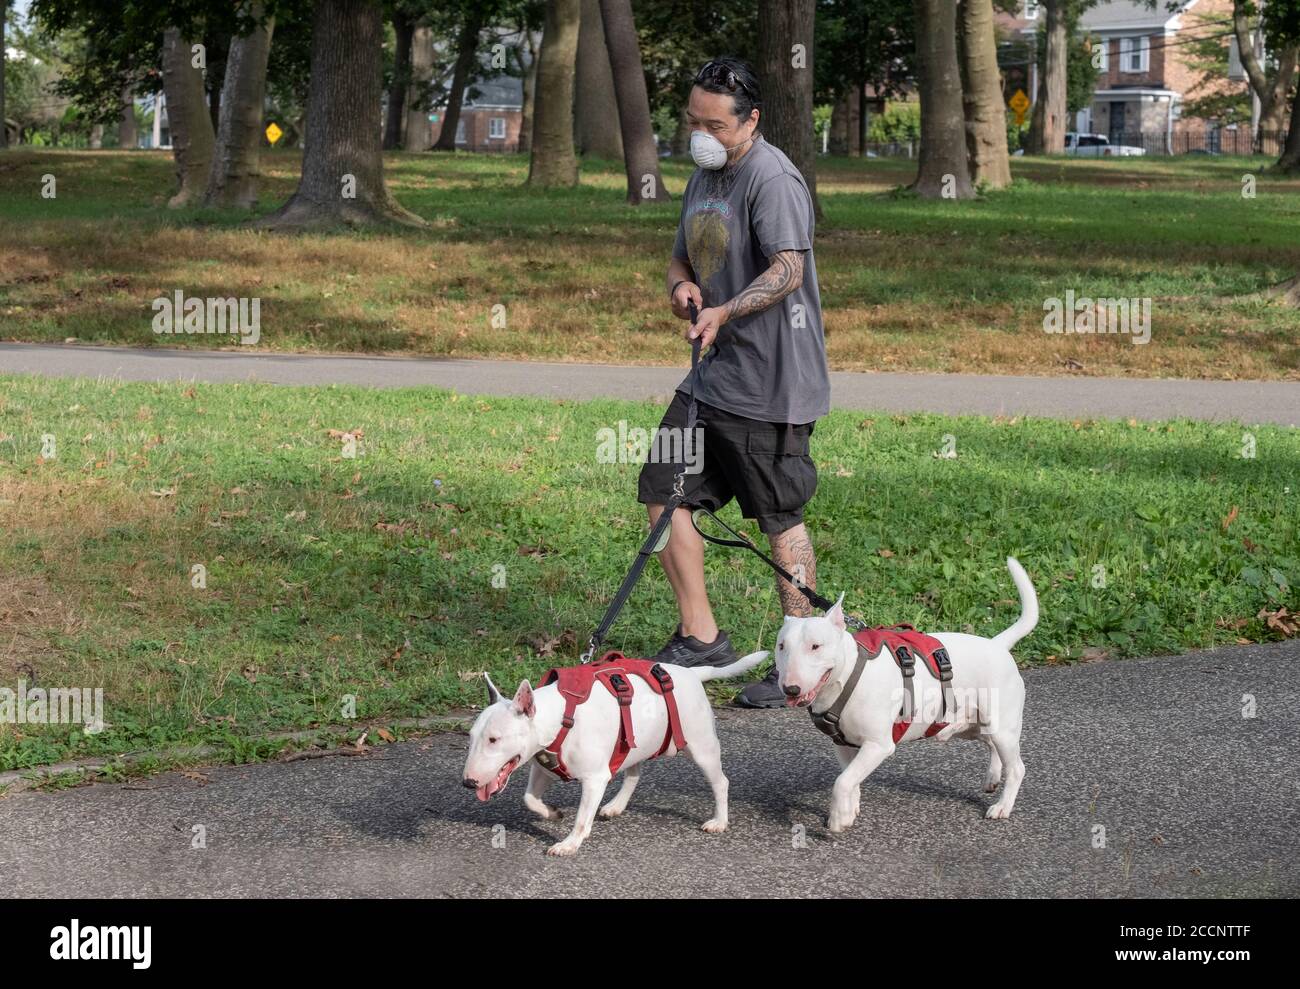 A man with multiple tattoos walks his 2 bull terriers in a park in Flushing, Queens, New York City. Stock Photo